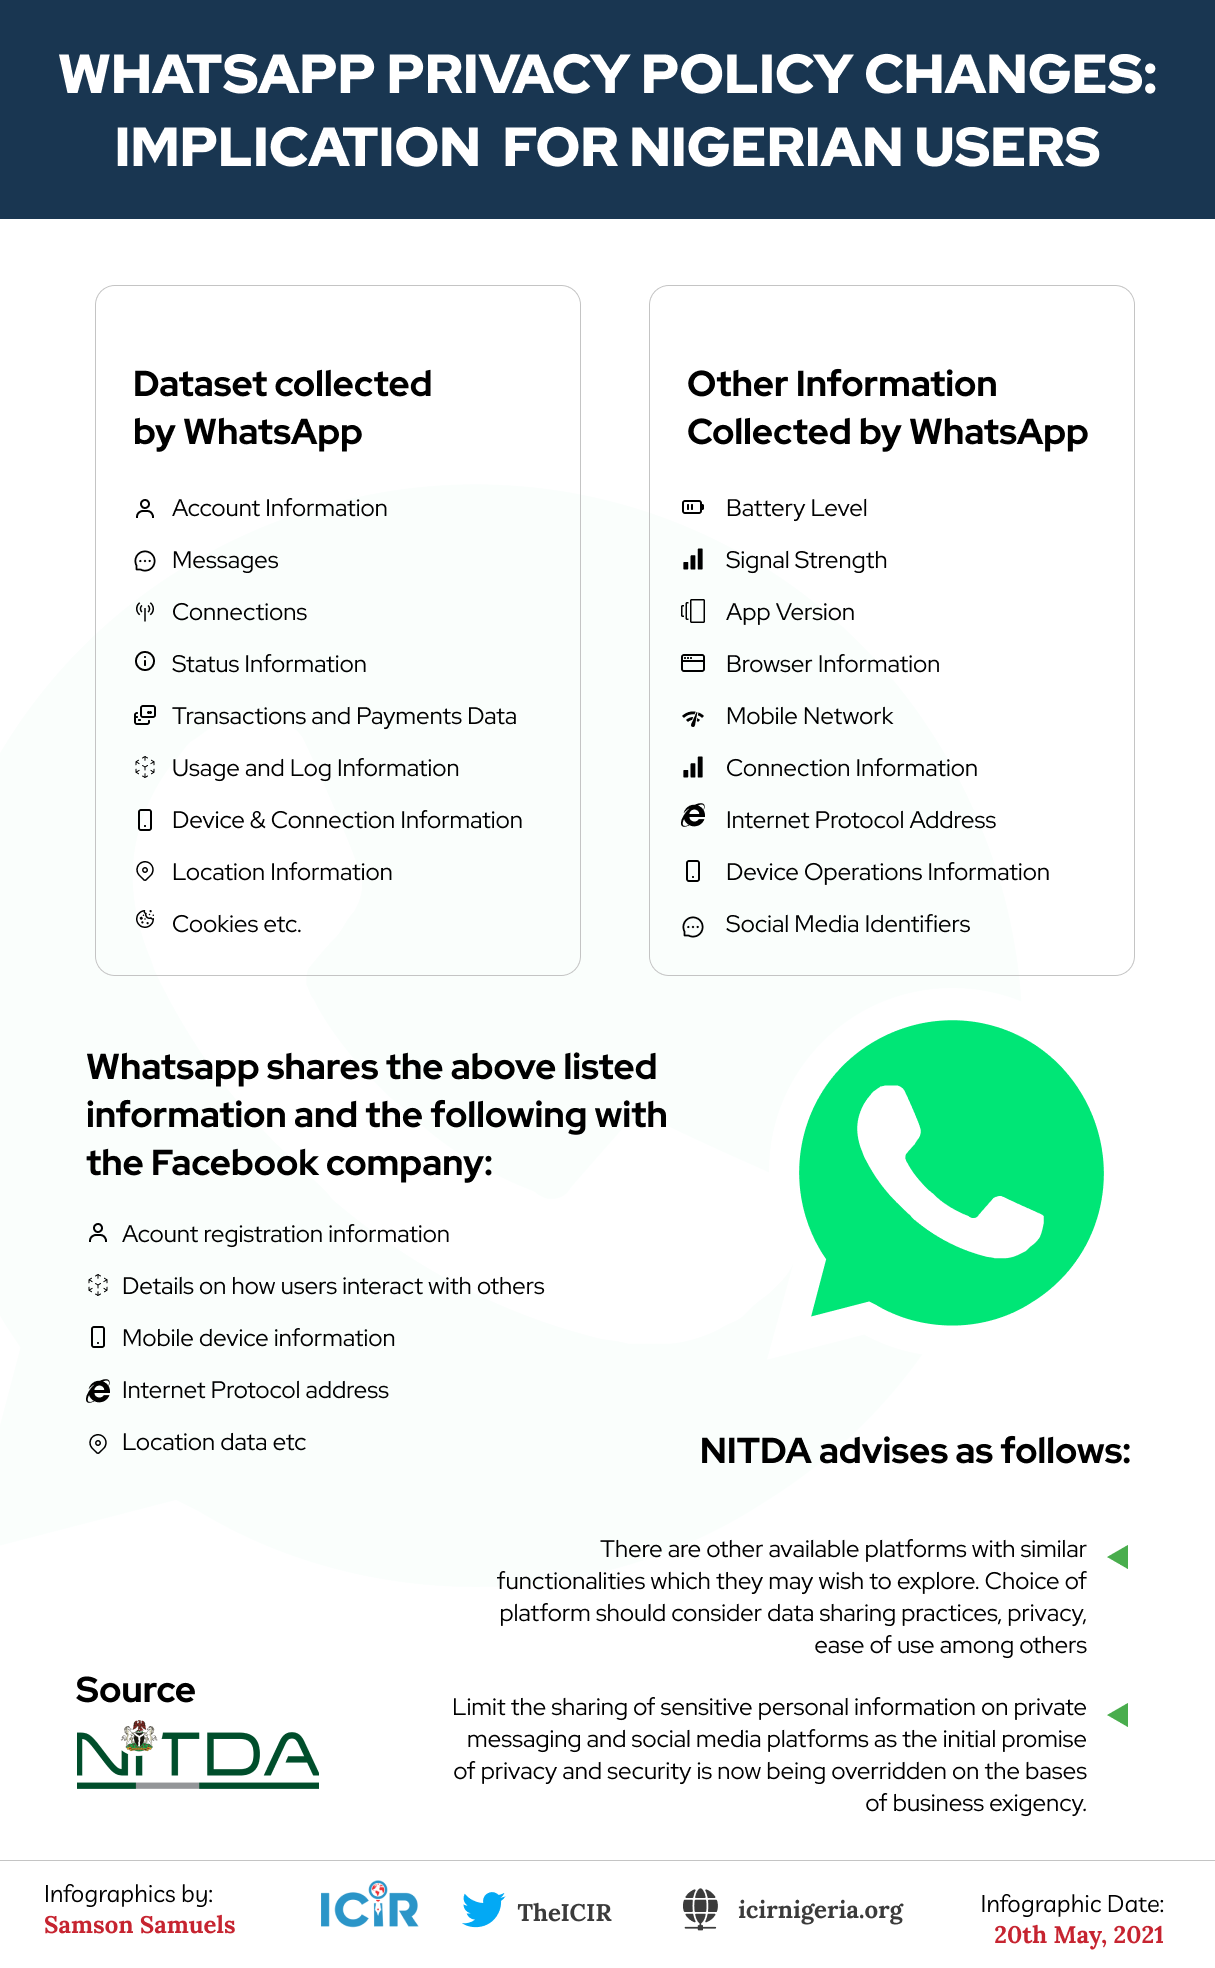 WHATSAPP PRIVACY POLICY CHANGES_ IMPLICATION FOR NIGERIAN USERS